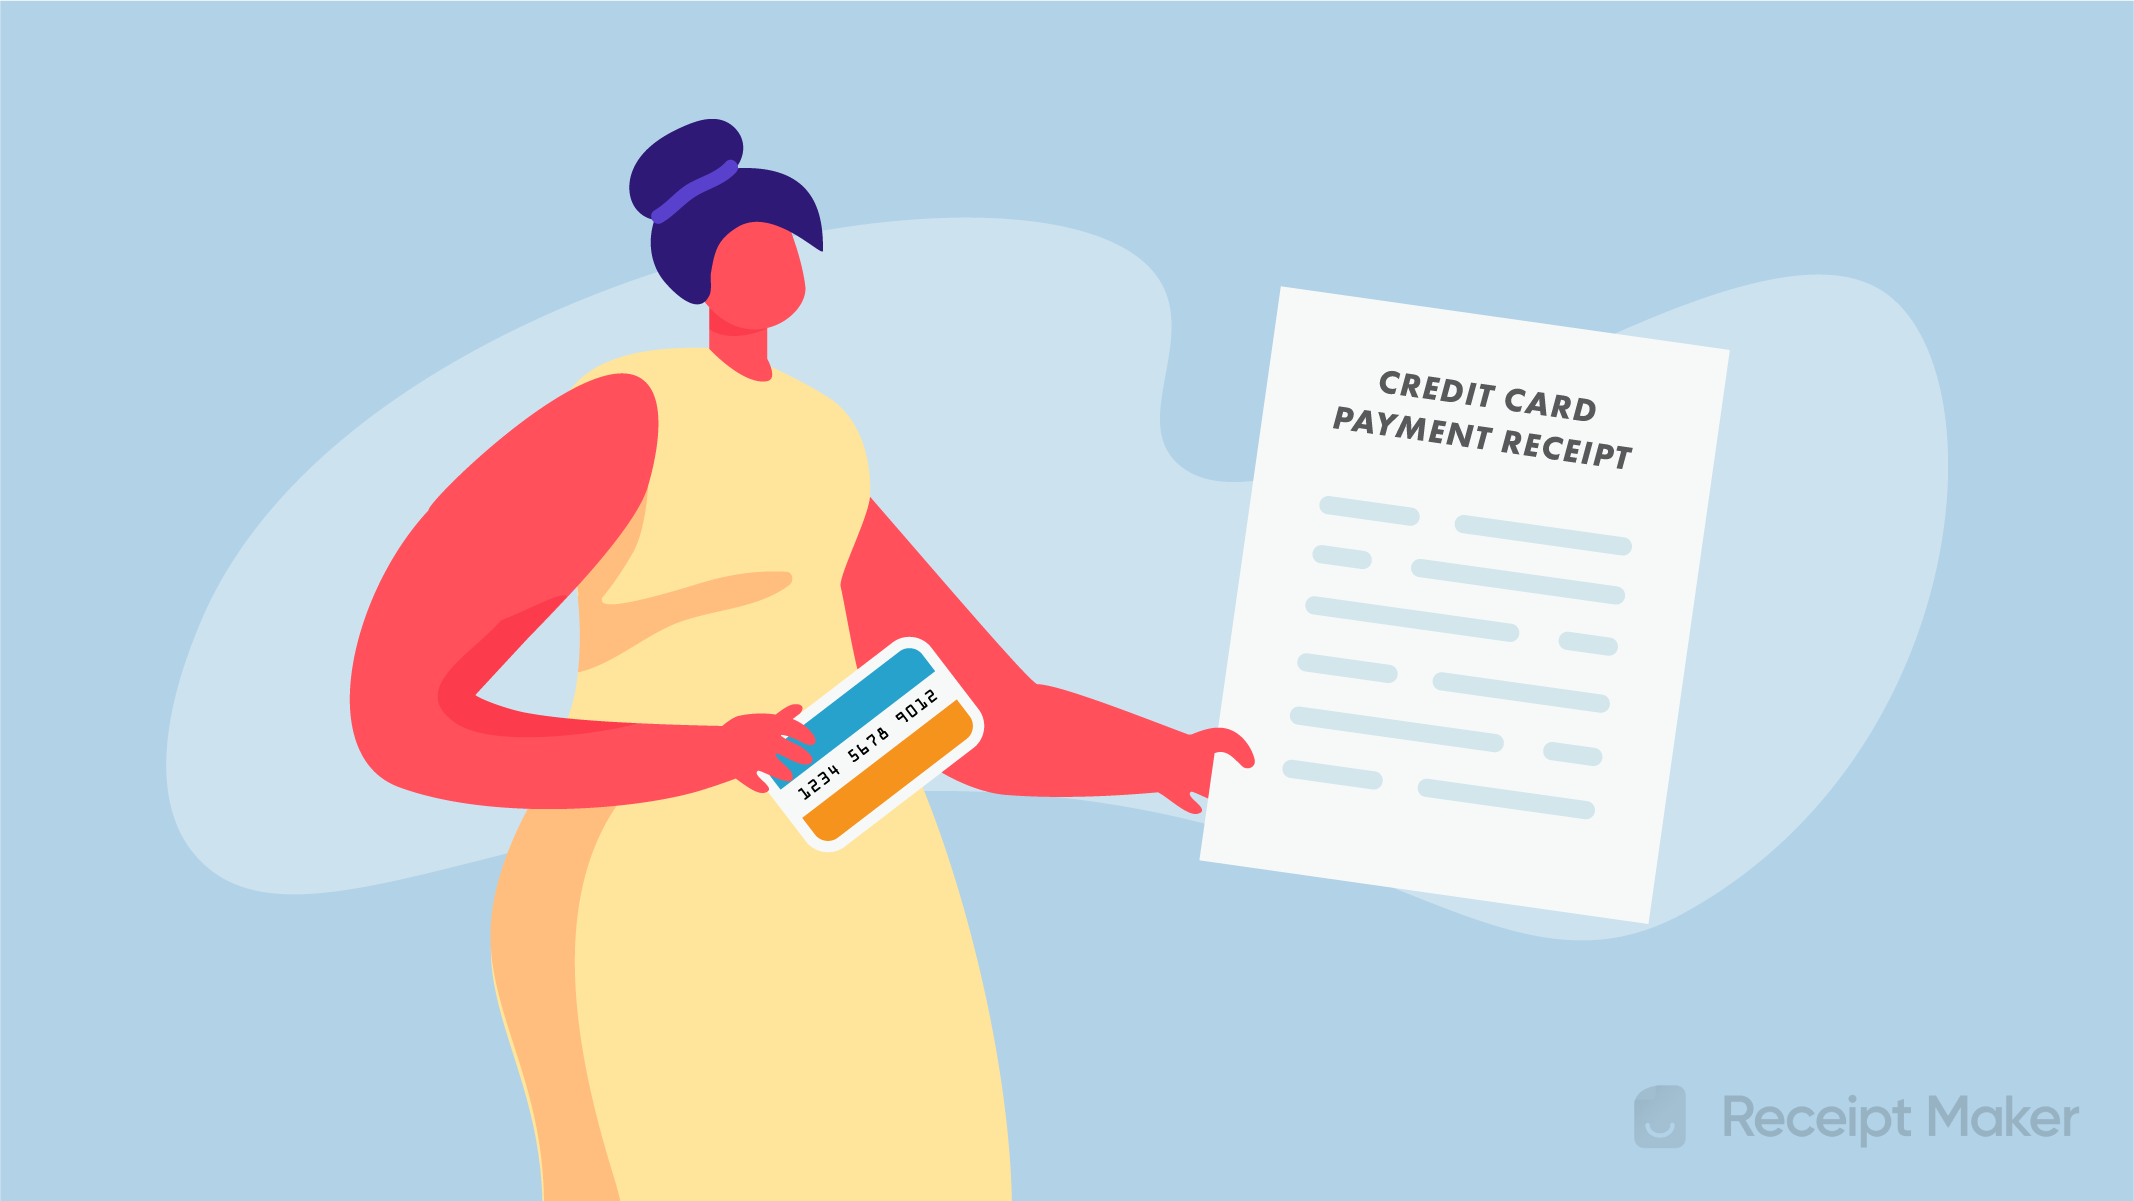 woman-holding-credit-card-holding-credit-card-payment-receipt